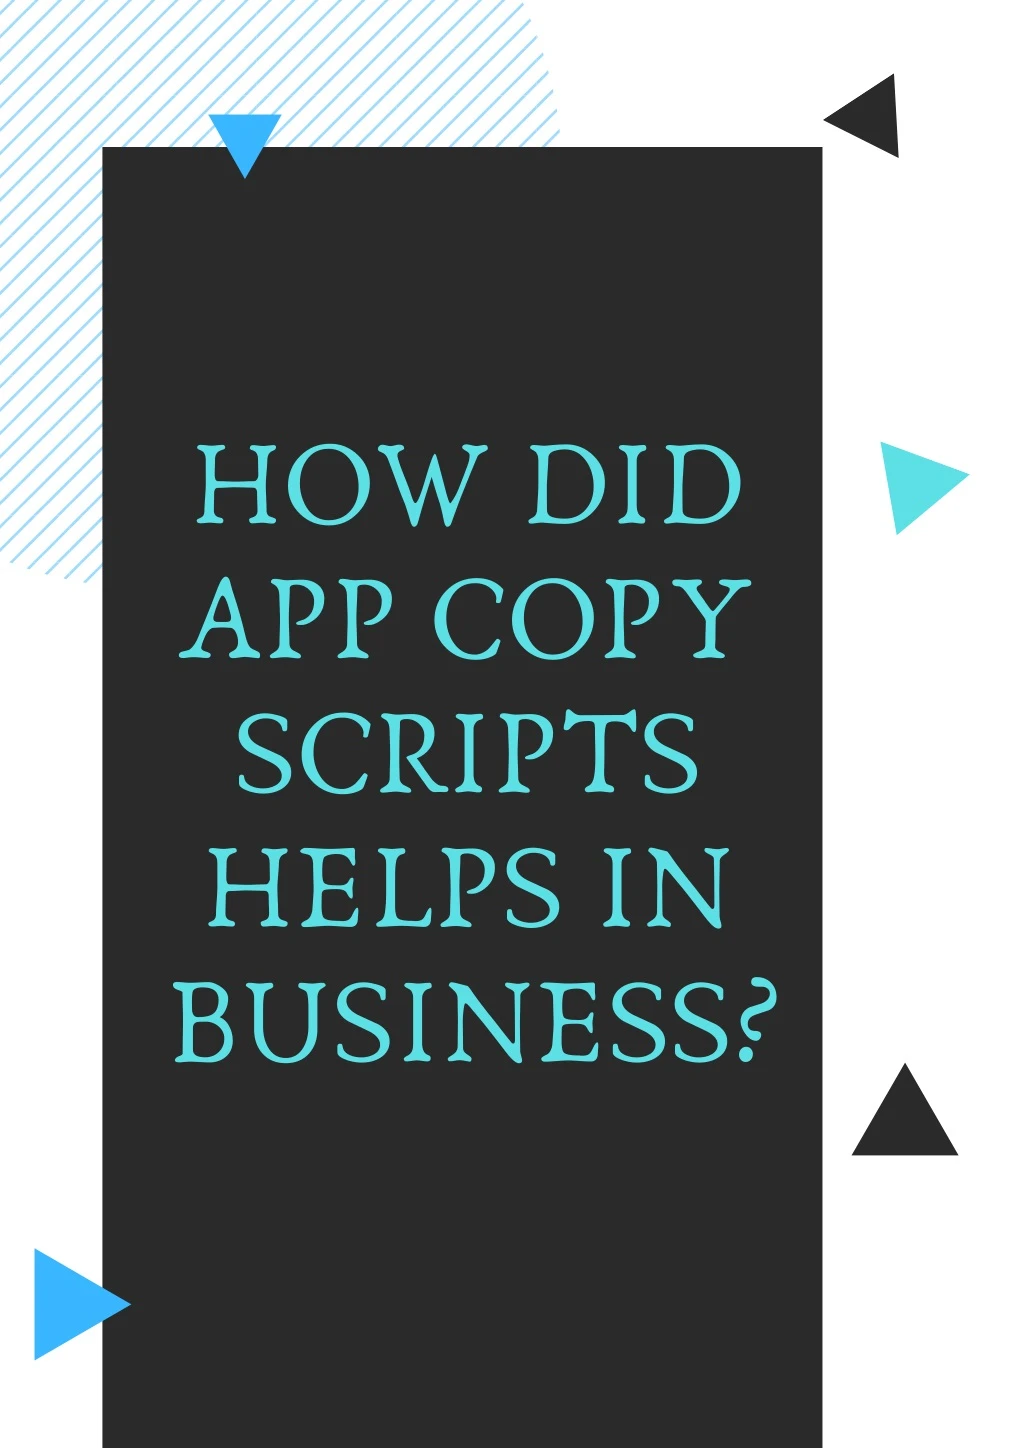 how did app copy scripts helps in business